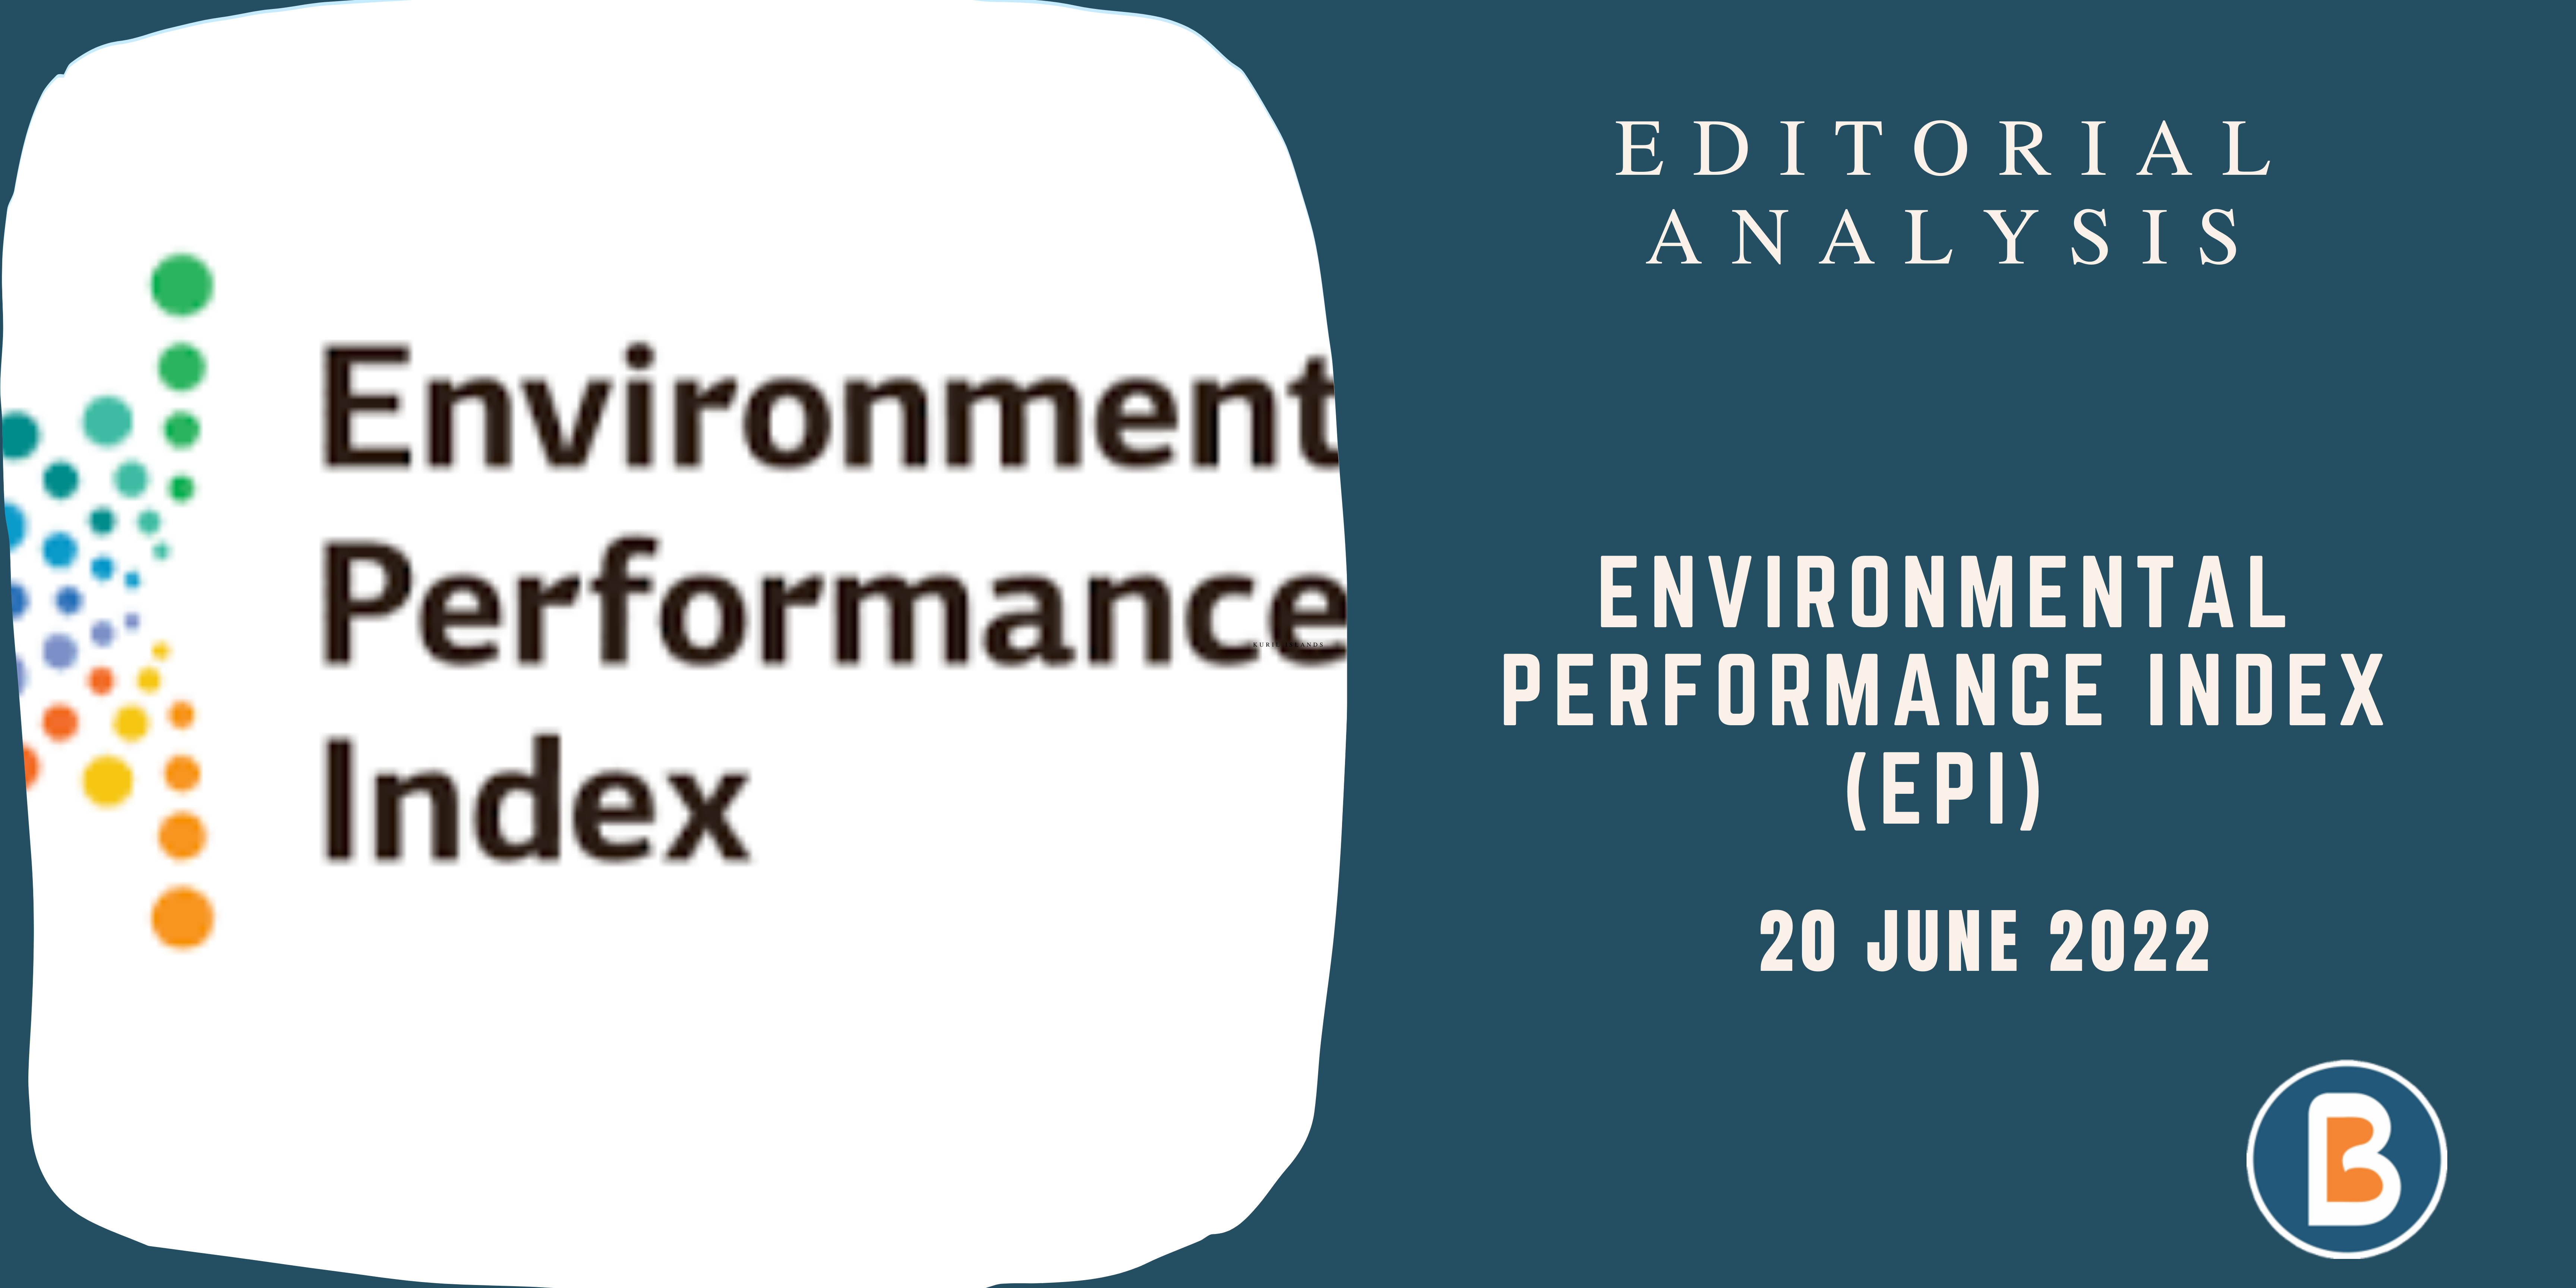 Editorial Analysis for Civil Services - Environmental Performance Index (EPI)